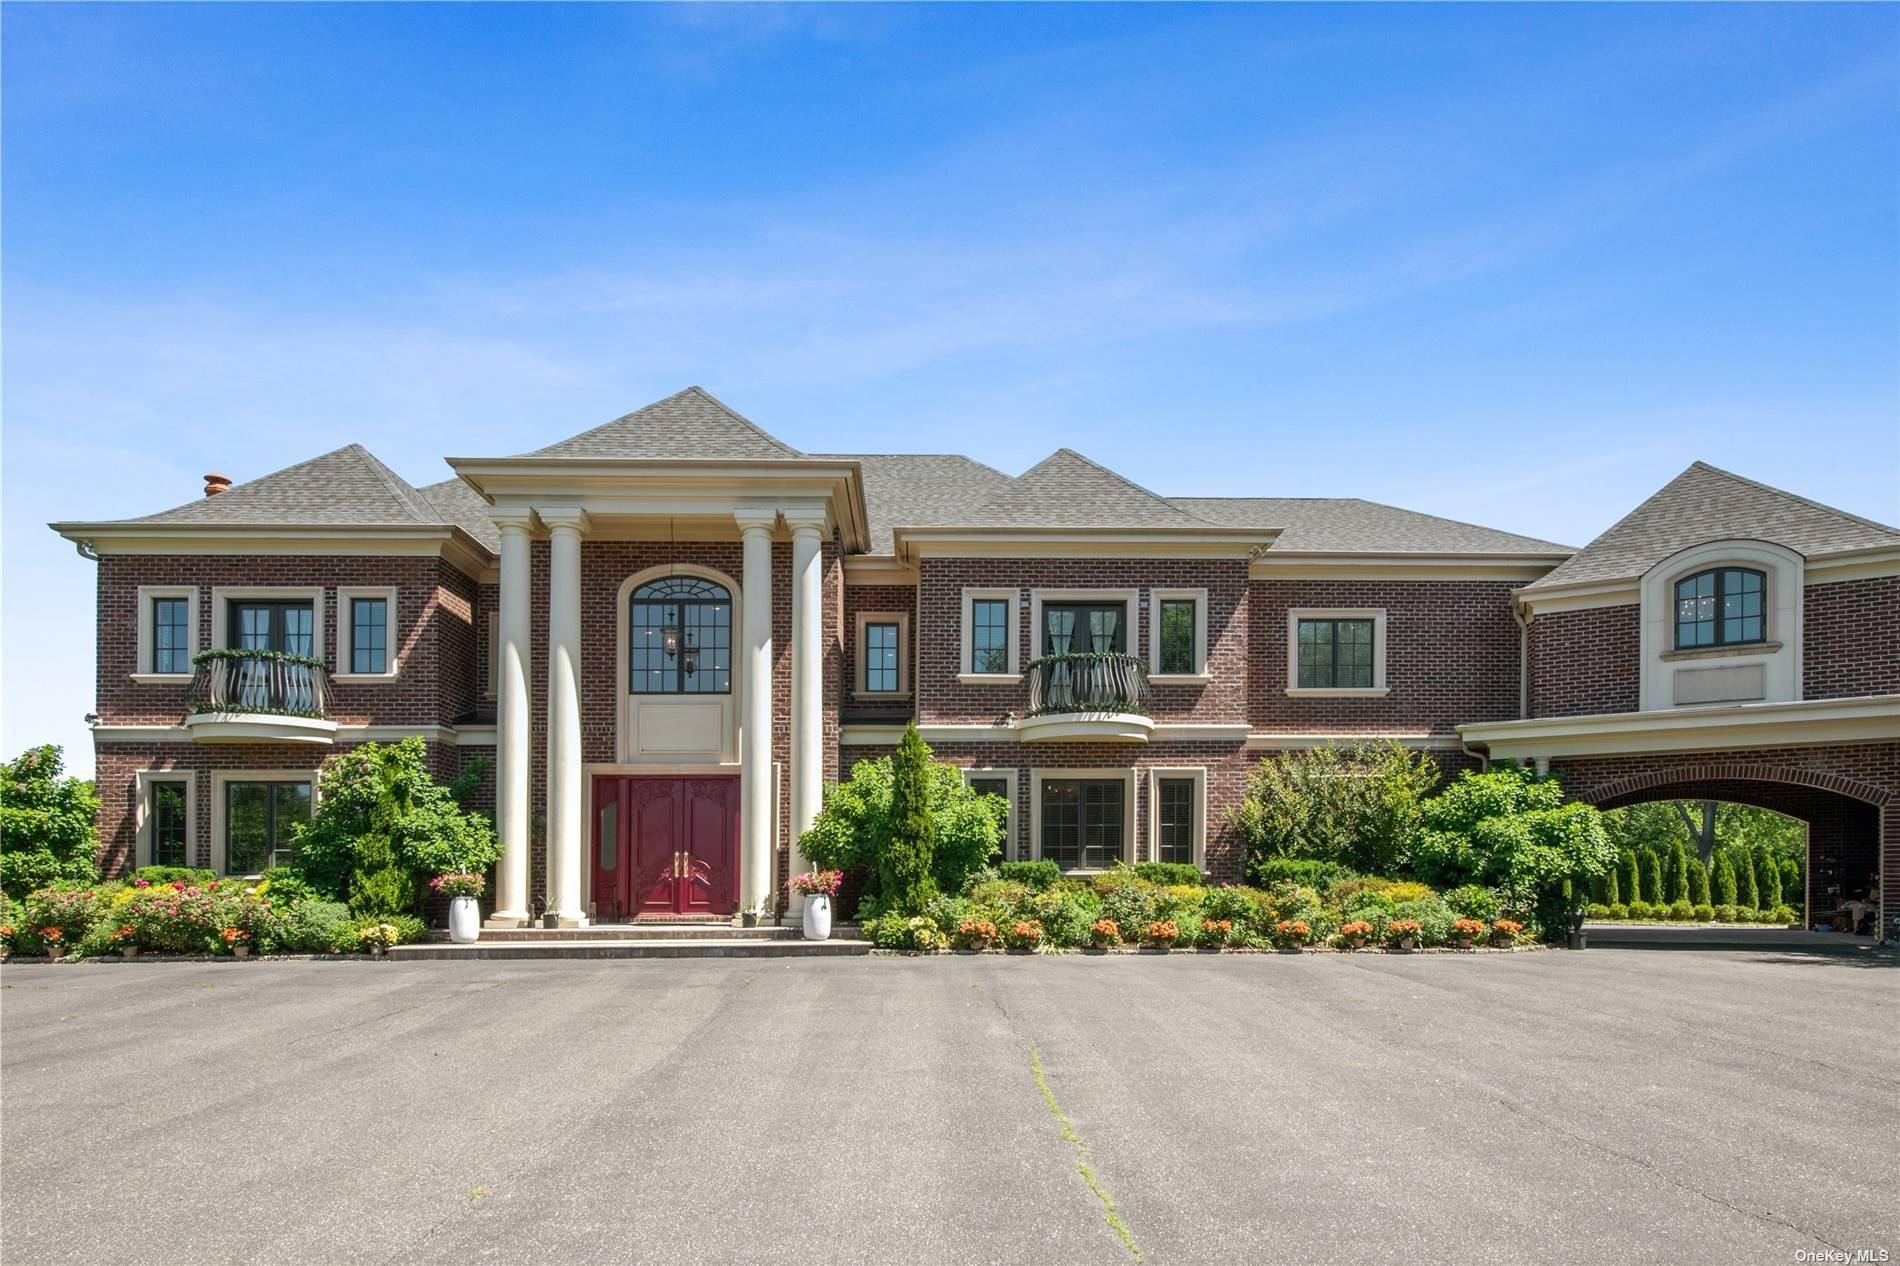 Welcome to this magnificent 10, 000 sq ft, brick center hall colonial located in the exclusive, private development of Greenfield Estates in Old Brookville.